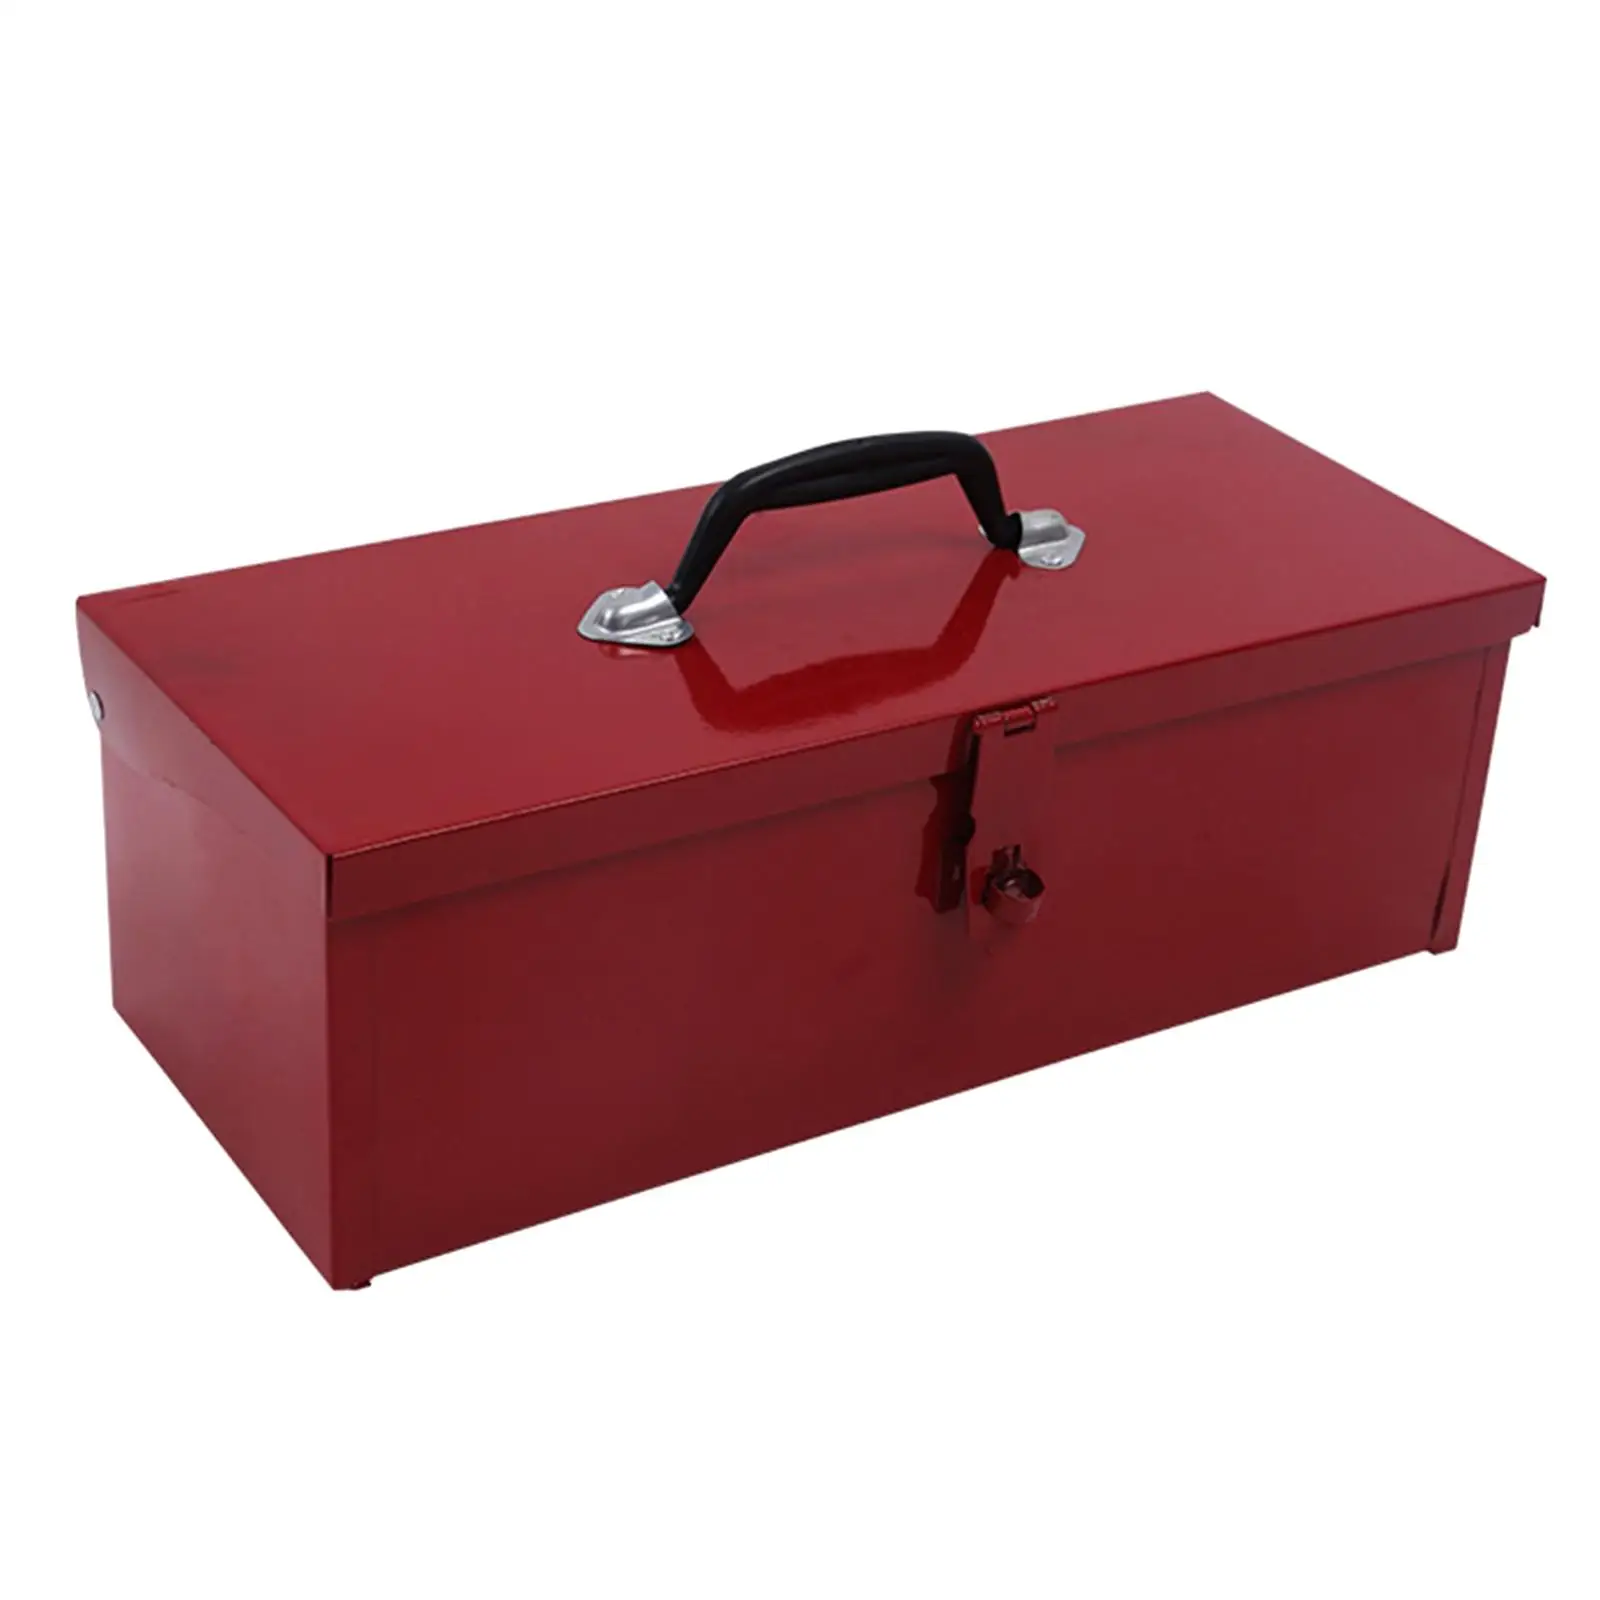 iron boxes tool Box multi function Portable Handle Storage Case Organizer tools box Heavy Duty Storage Box for Home Workshop